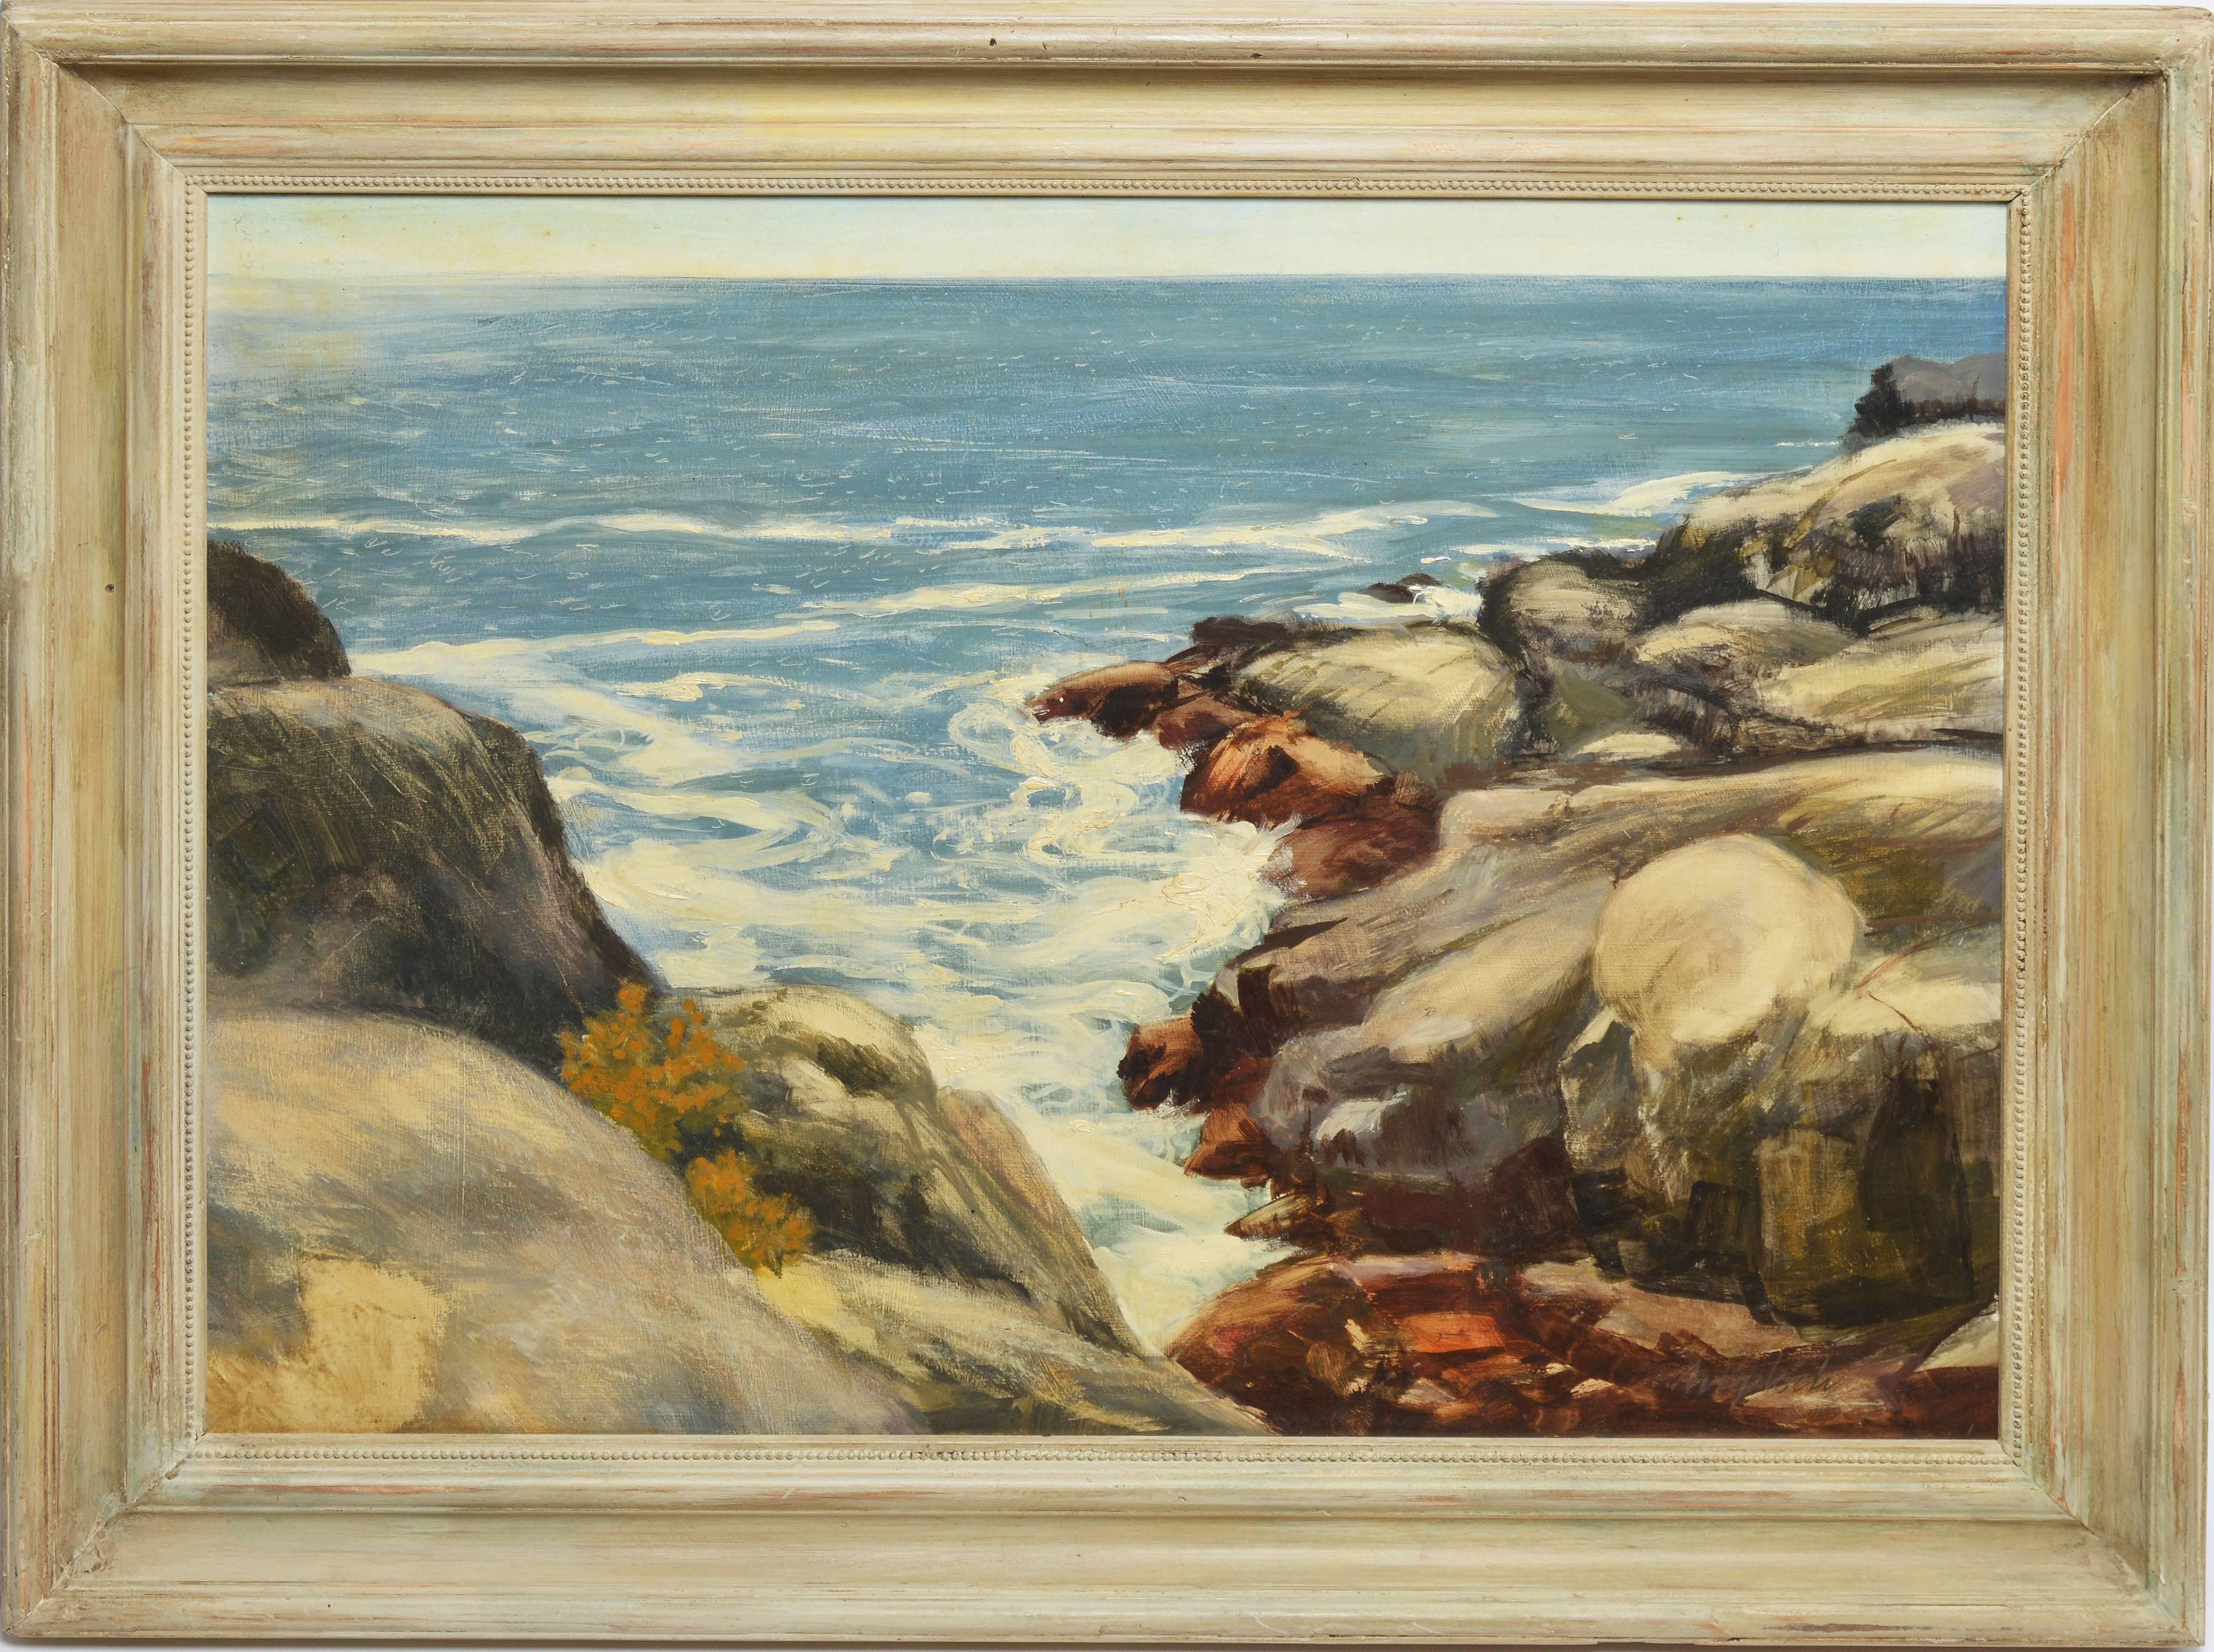 Modernist view of a coast.  Oil on board, circa 1950.  Signed lower right, "Angeloch".  Displayed in a grey wood frame.  Image size 24"L x 18"H.